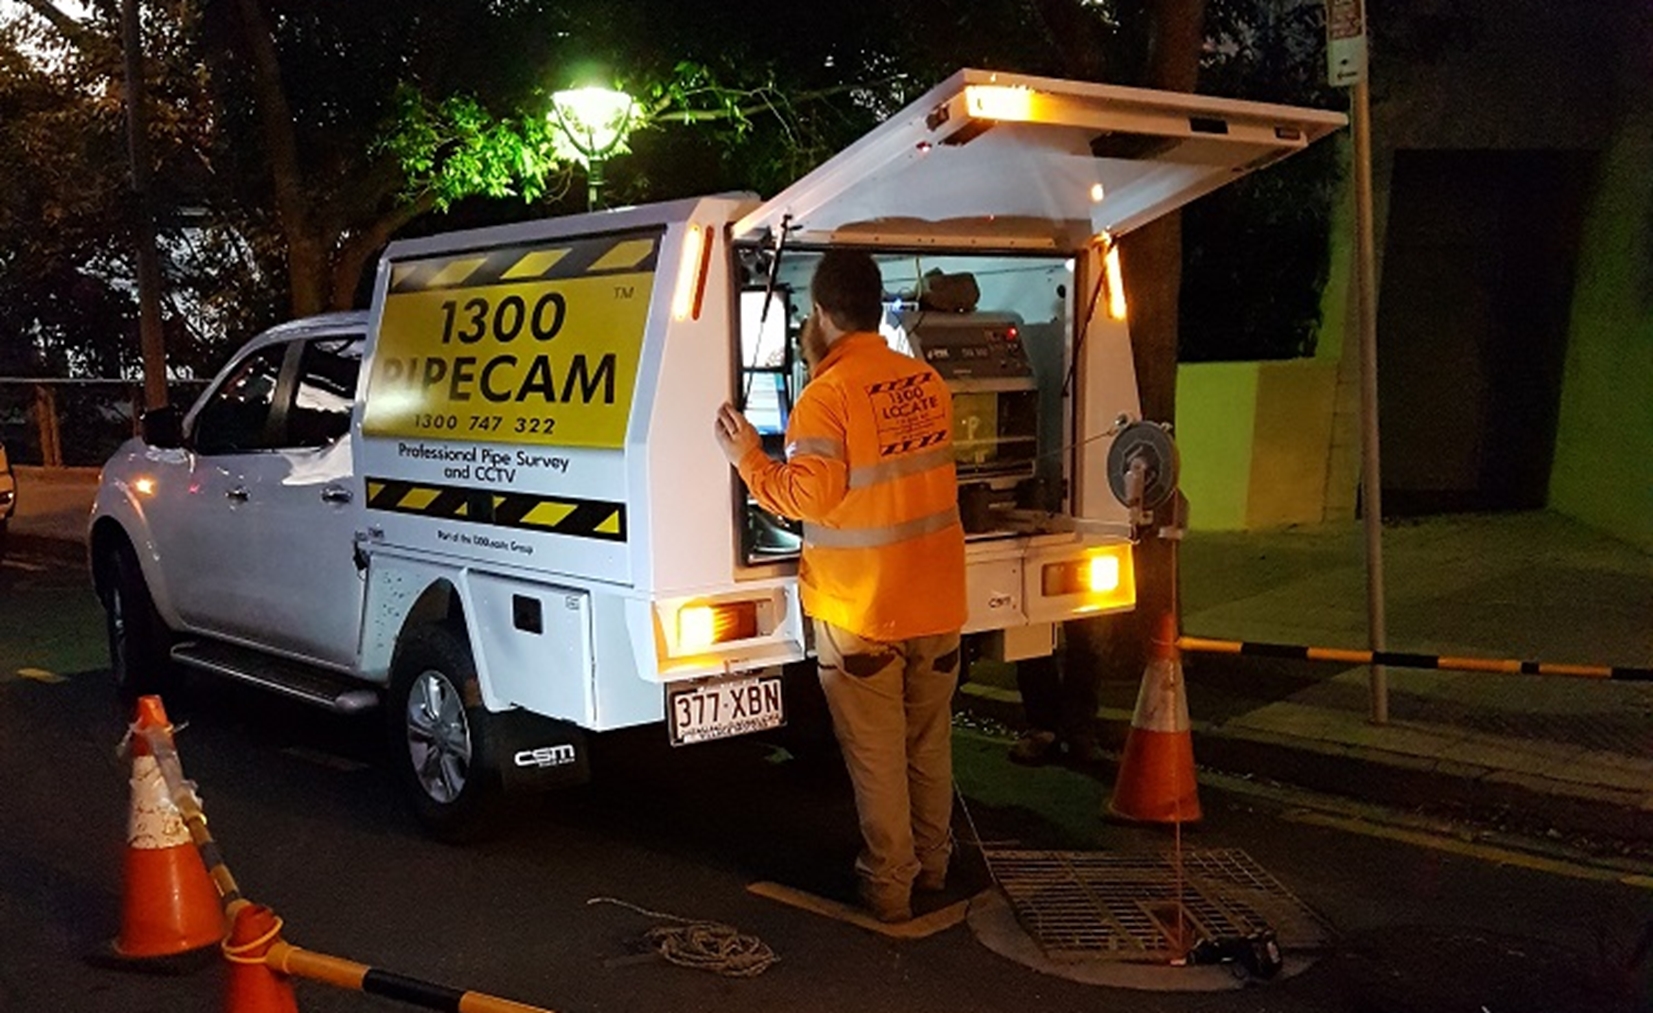 Underground leak detection being conducted at night | Featured image for the Acoustic Leak Detection service page for 1300Locate.